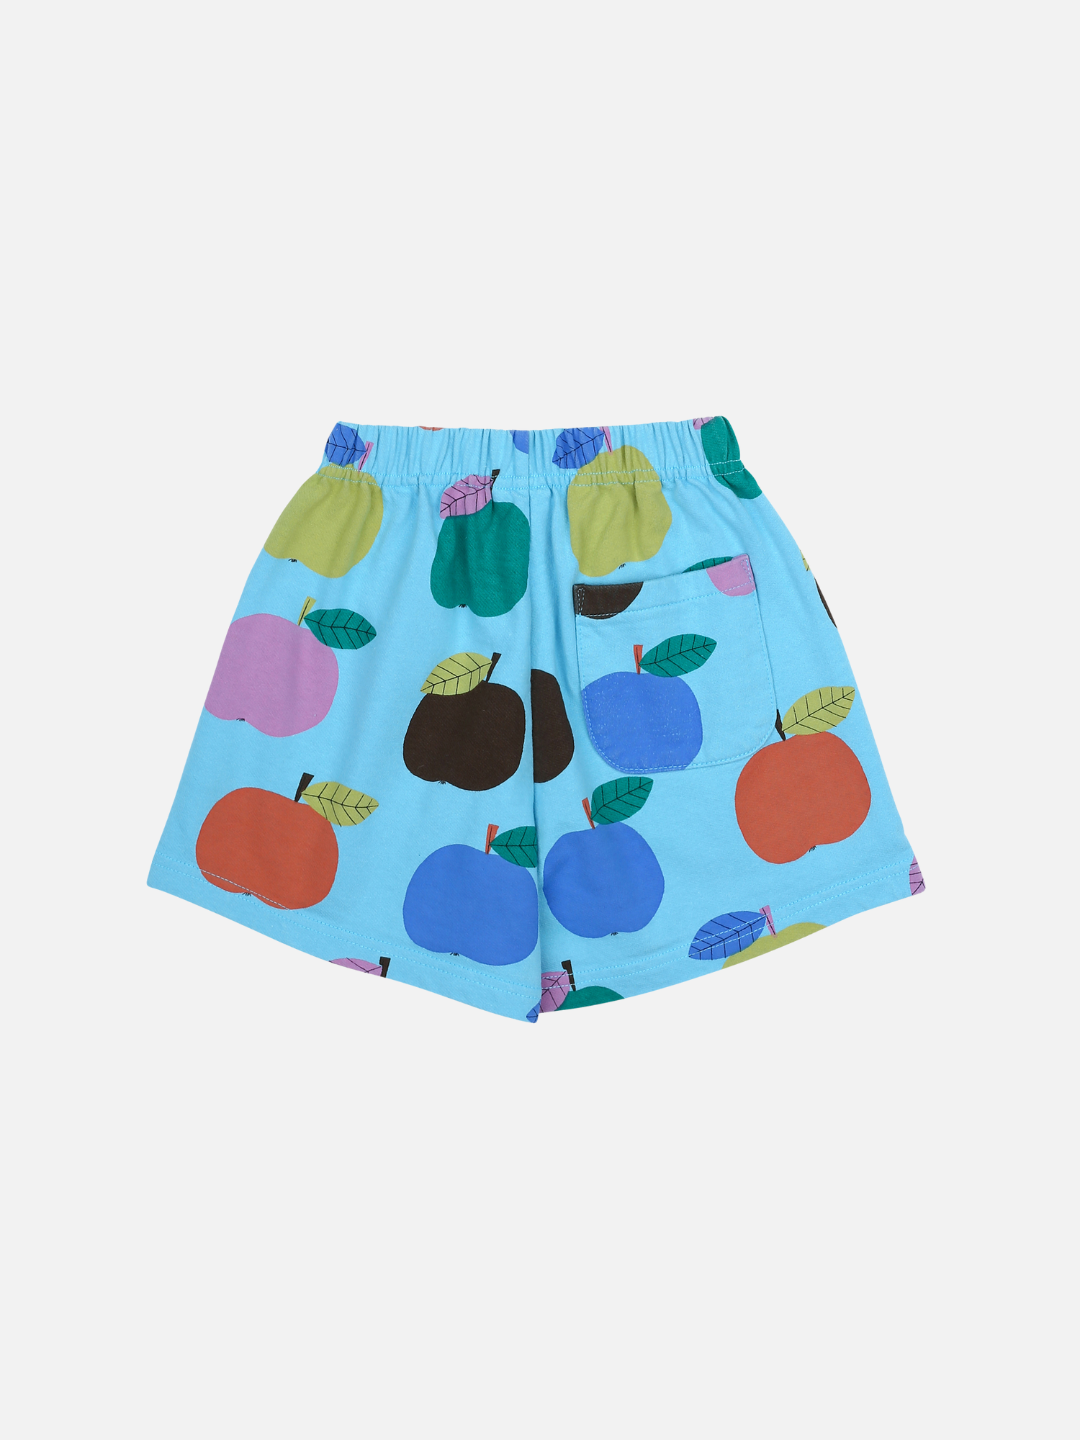 Back of Colorful Apple Shorts. Multi-colored apple print on a light blue background with an elastic waist.